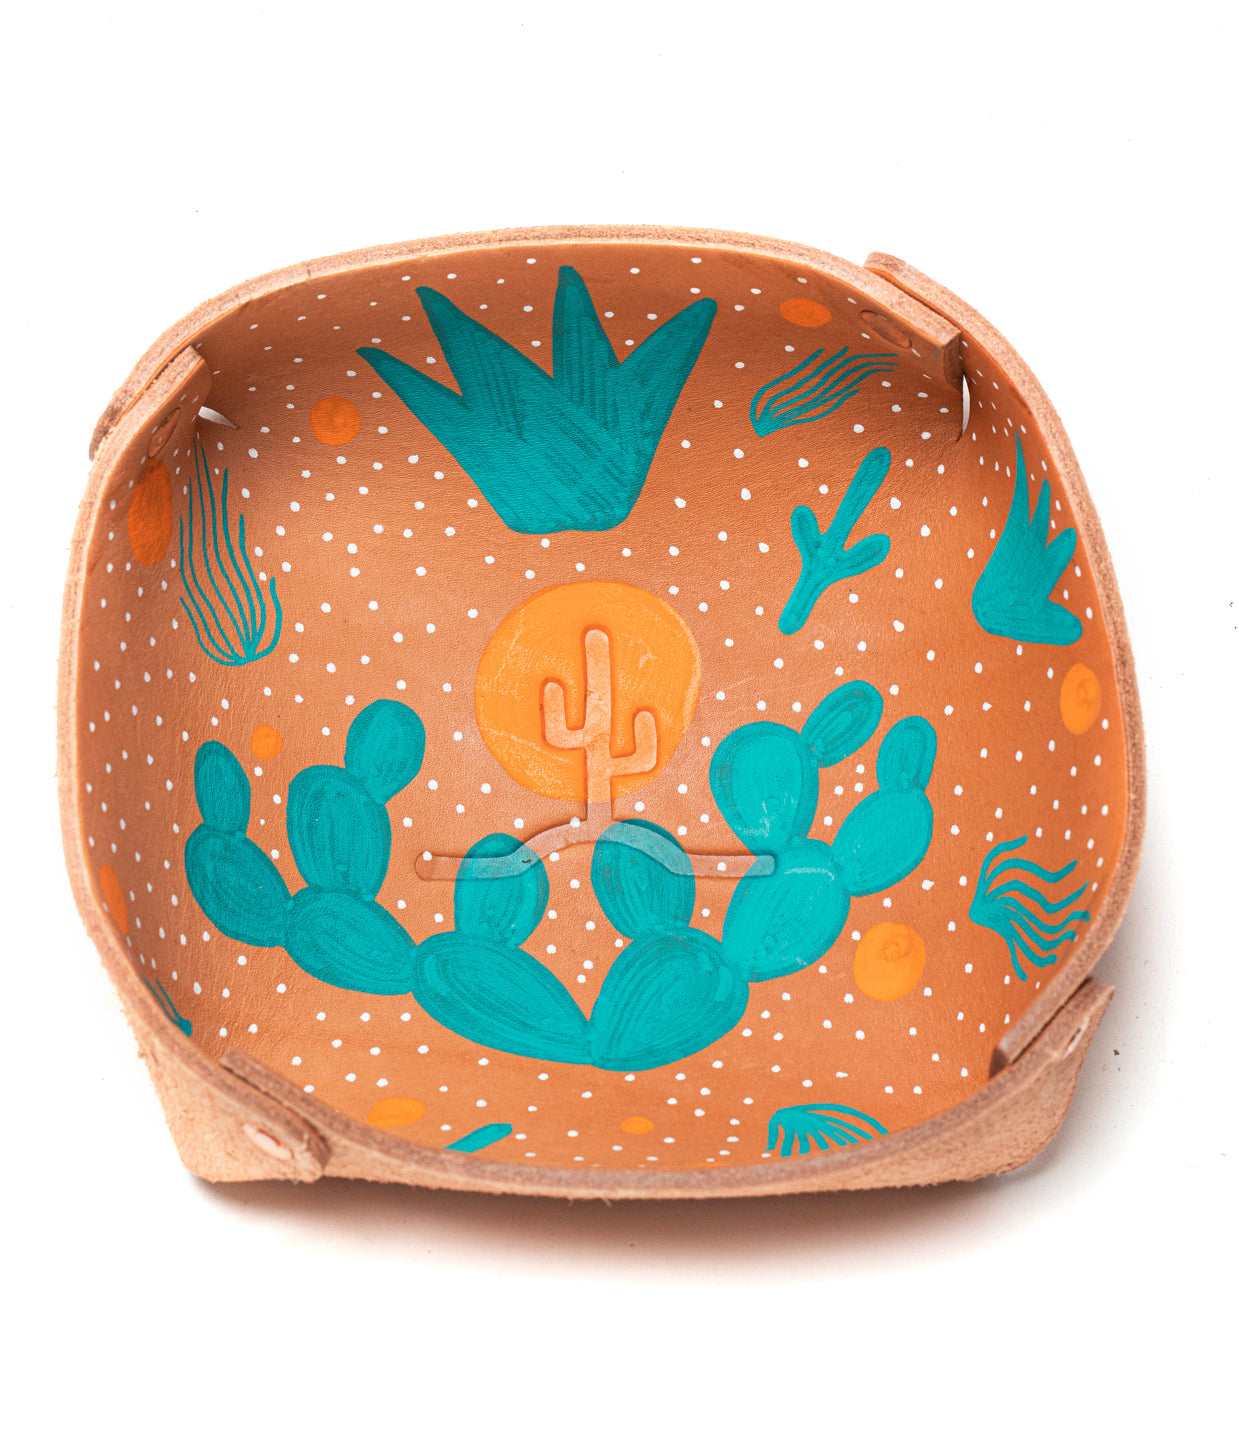 Flying Cactus Catch // Handpainted Southwest